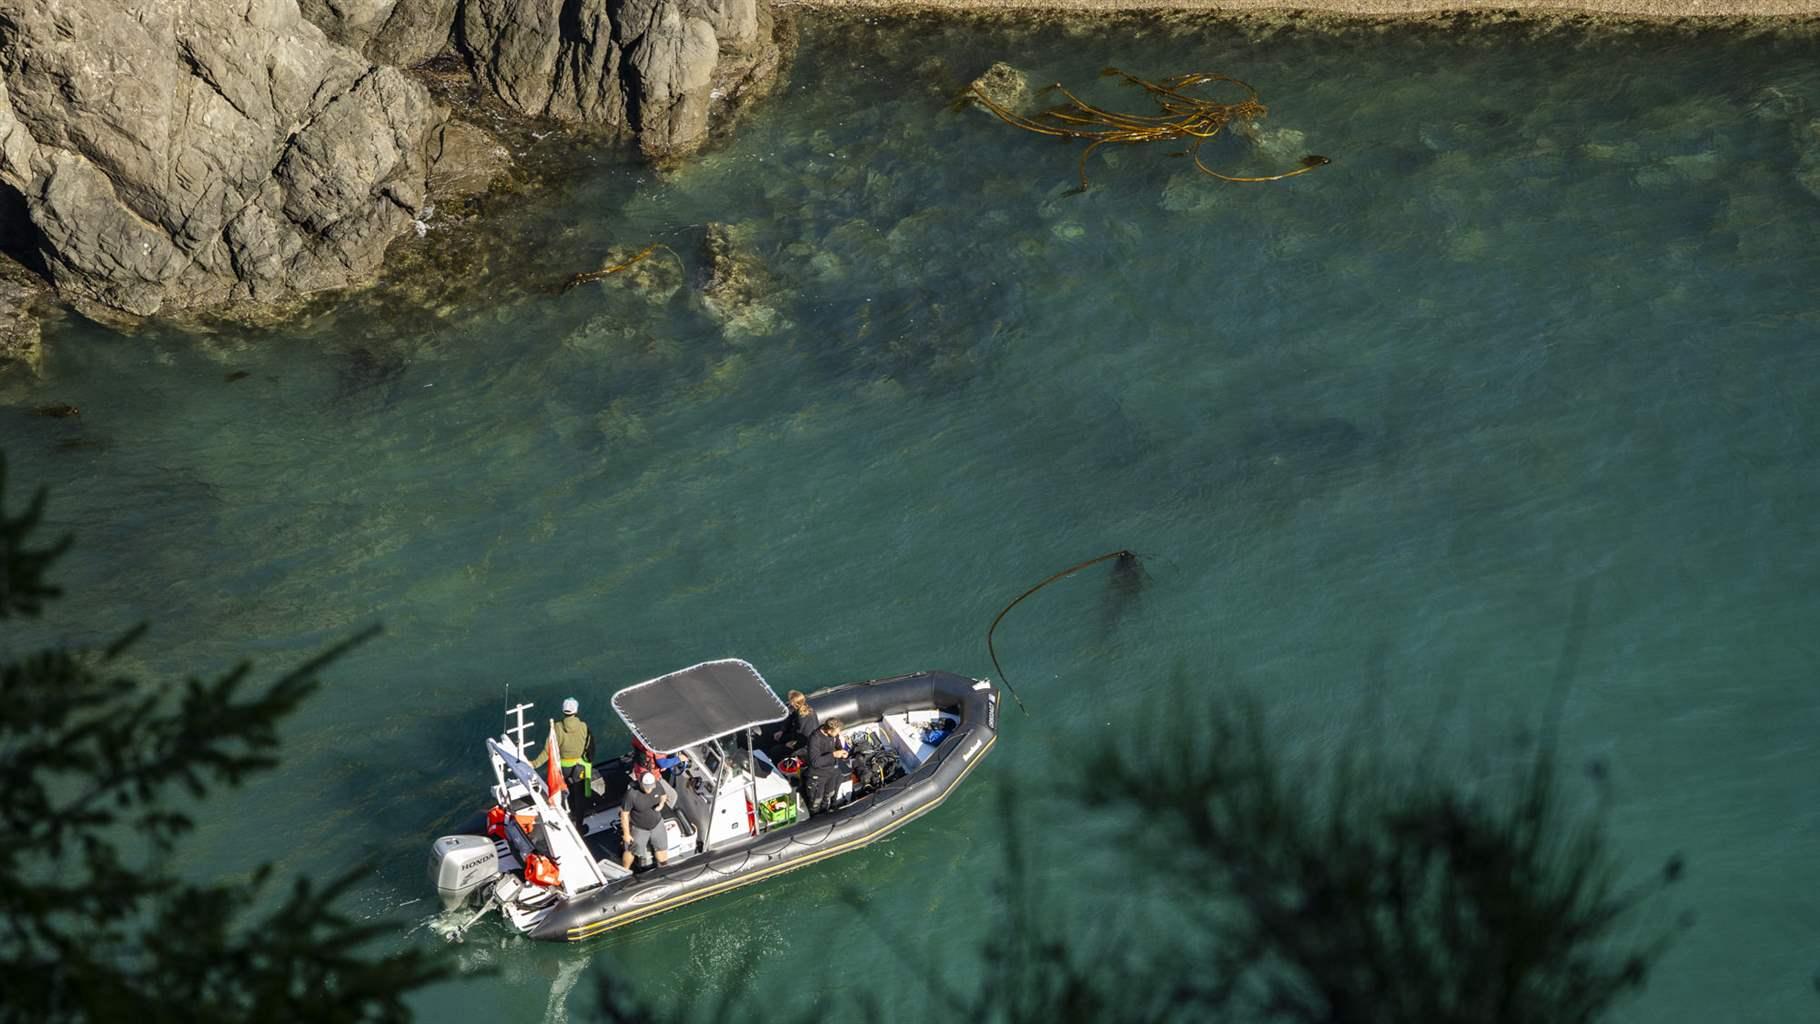 An aerial view shows a small boat with an outboard motor and three people on board anchored in a rock- and tree-lined cove of clear, aquamarine water. 